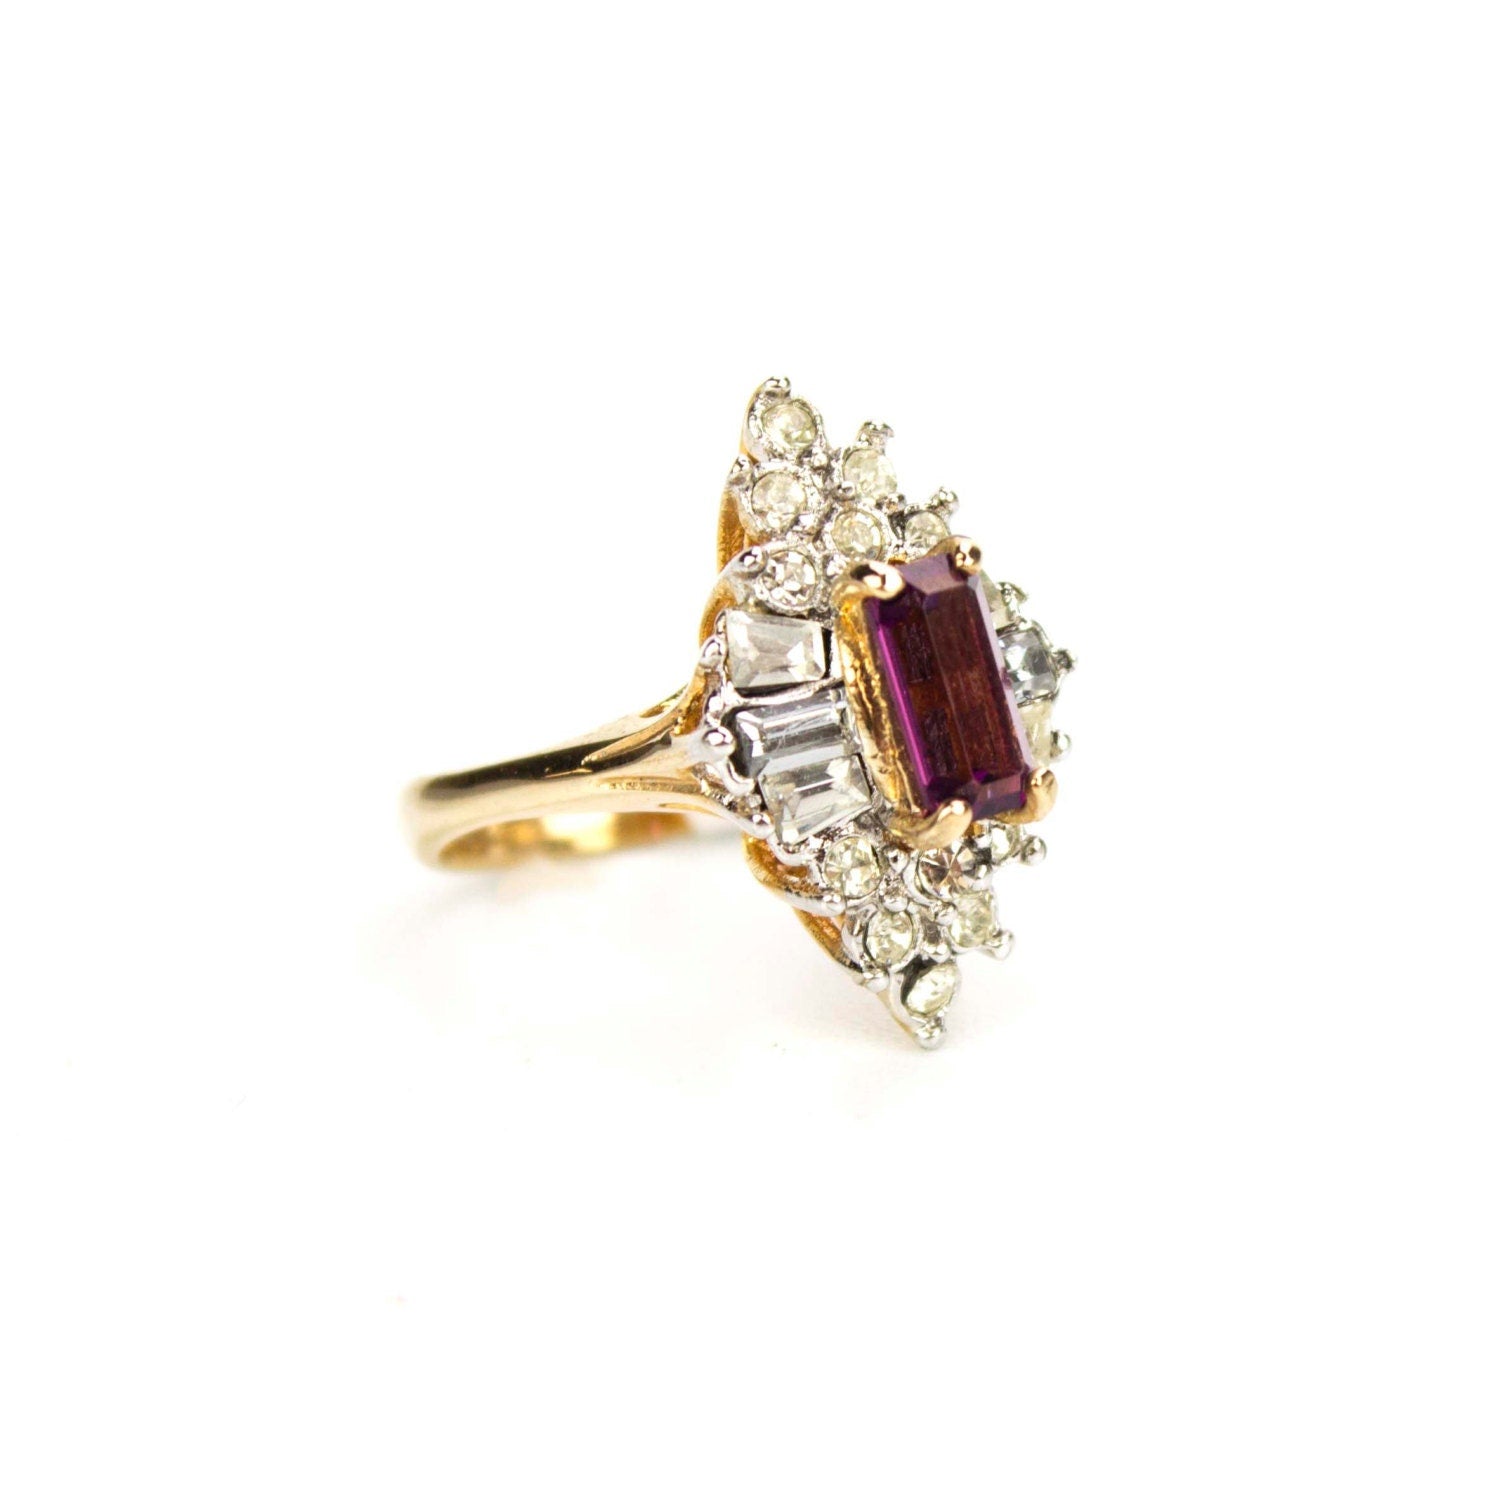 Vintage Ring 1970s Ring Amethyst and Clear Swarovski Crystals 18k Gold Plated Band #R2001 - Limited Stock - Never Worn